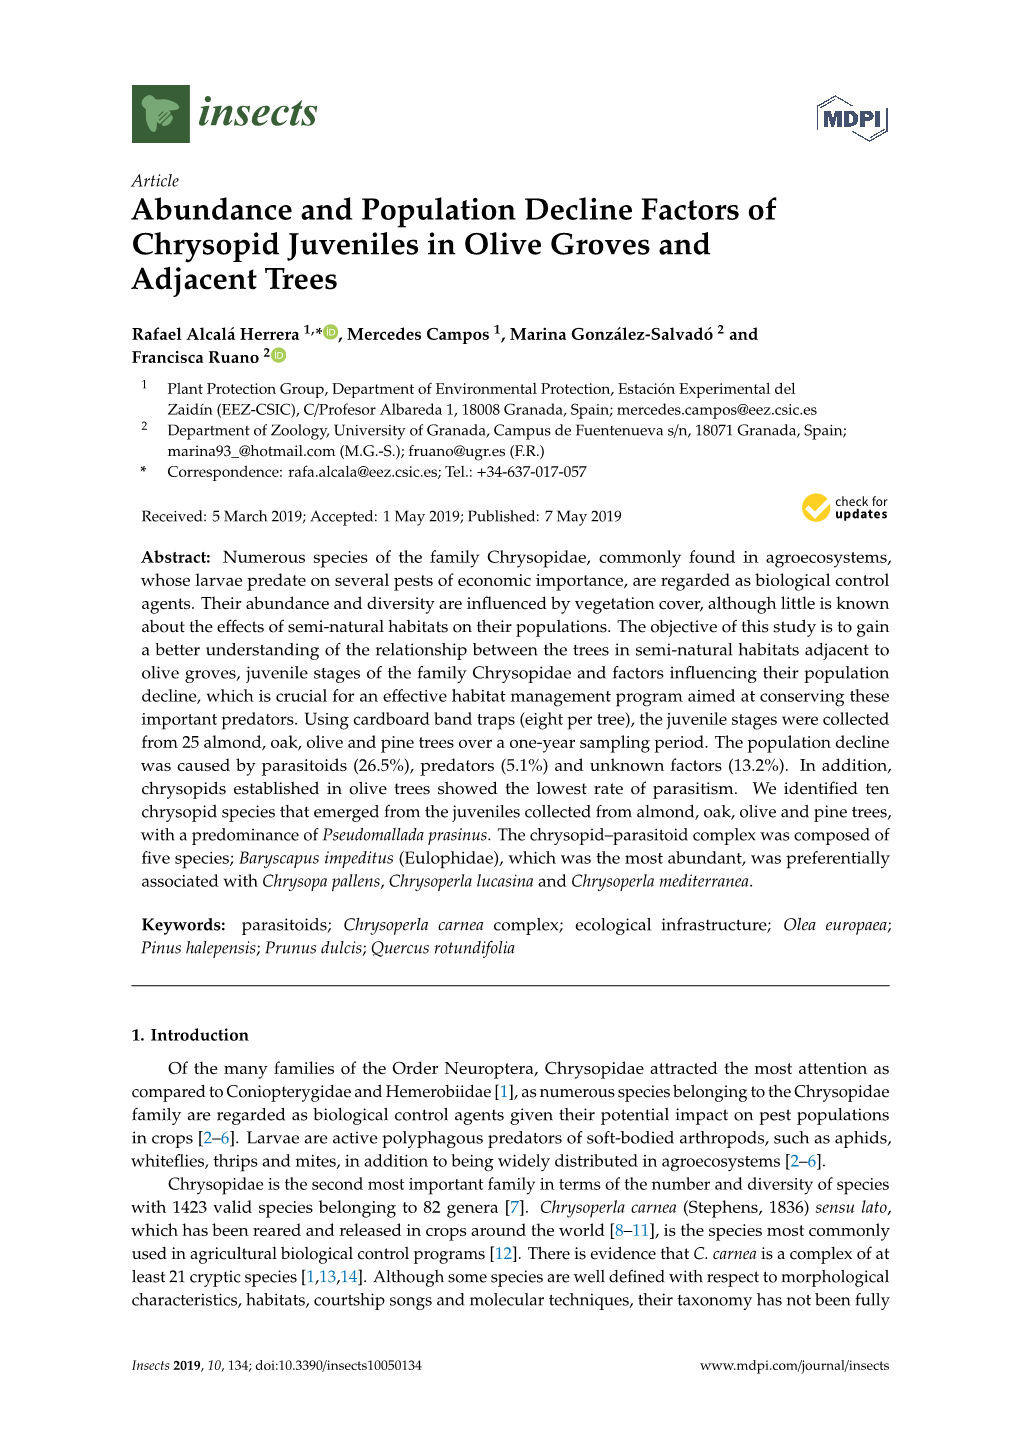 Abundance and Population Decline Factors of Chrysopid Juveniles in Olive Groves and Adjacent Trees